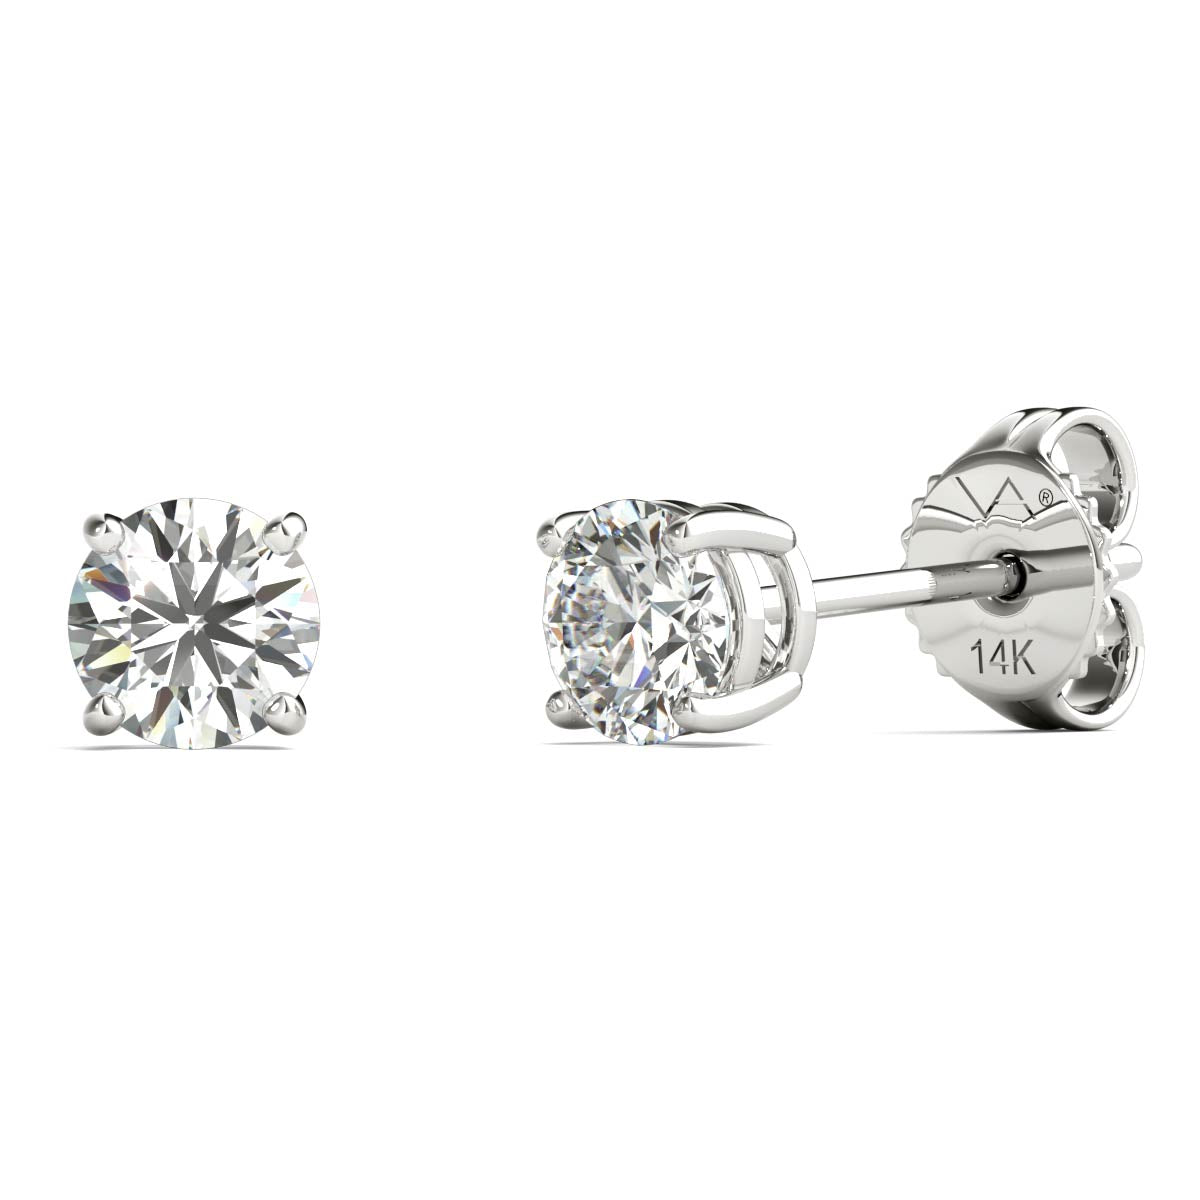 Solitaire Diamond Earrings (1/2 Ctw, AGS Certified, GH-SI2/I1) 14K White Gold